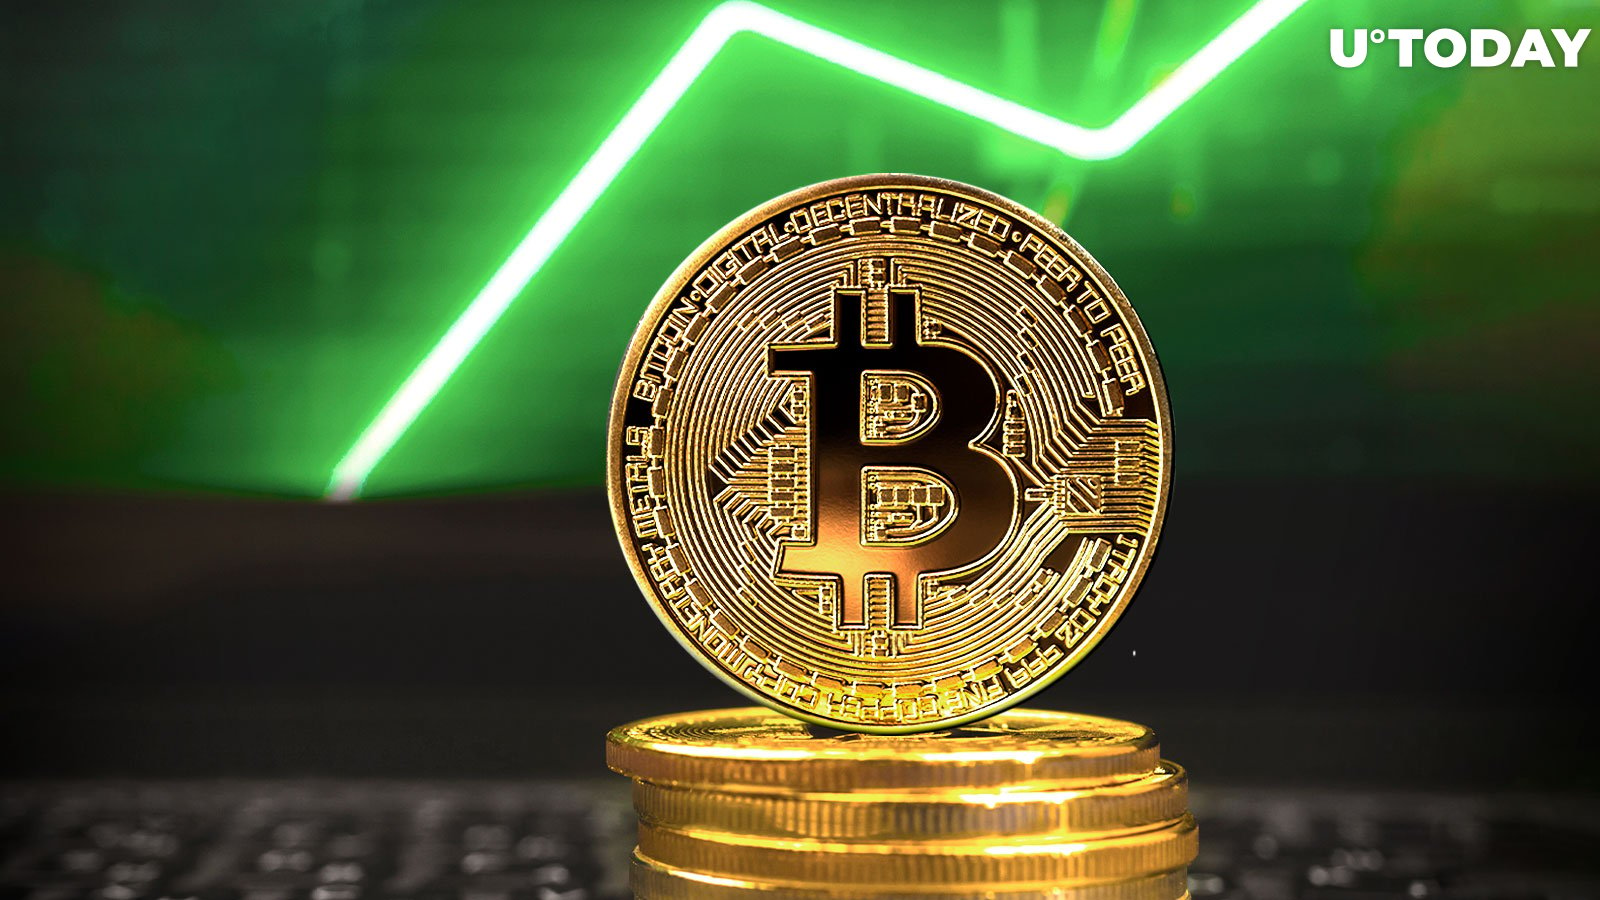 Bitcoin (BTC) Soars Above $71,000 and Hits New Record High